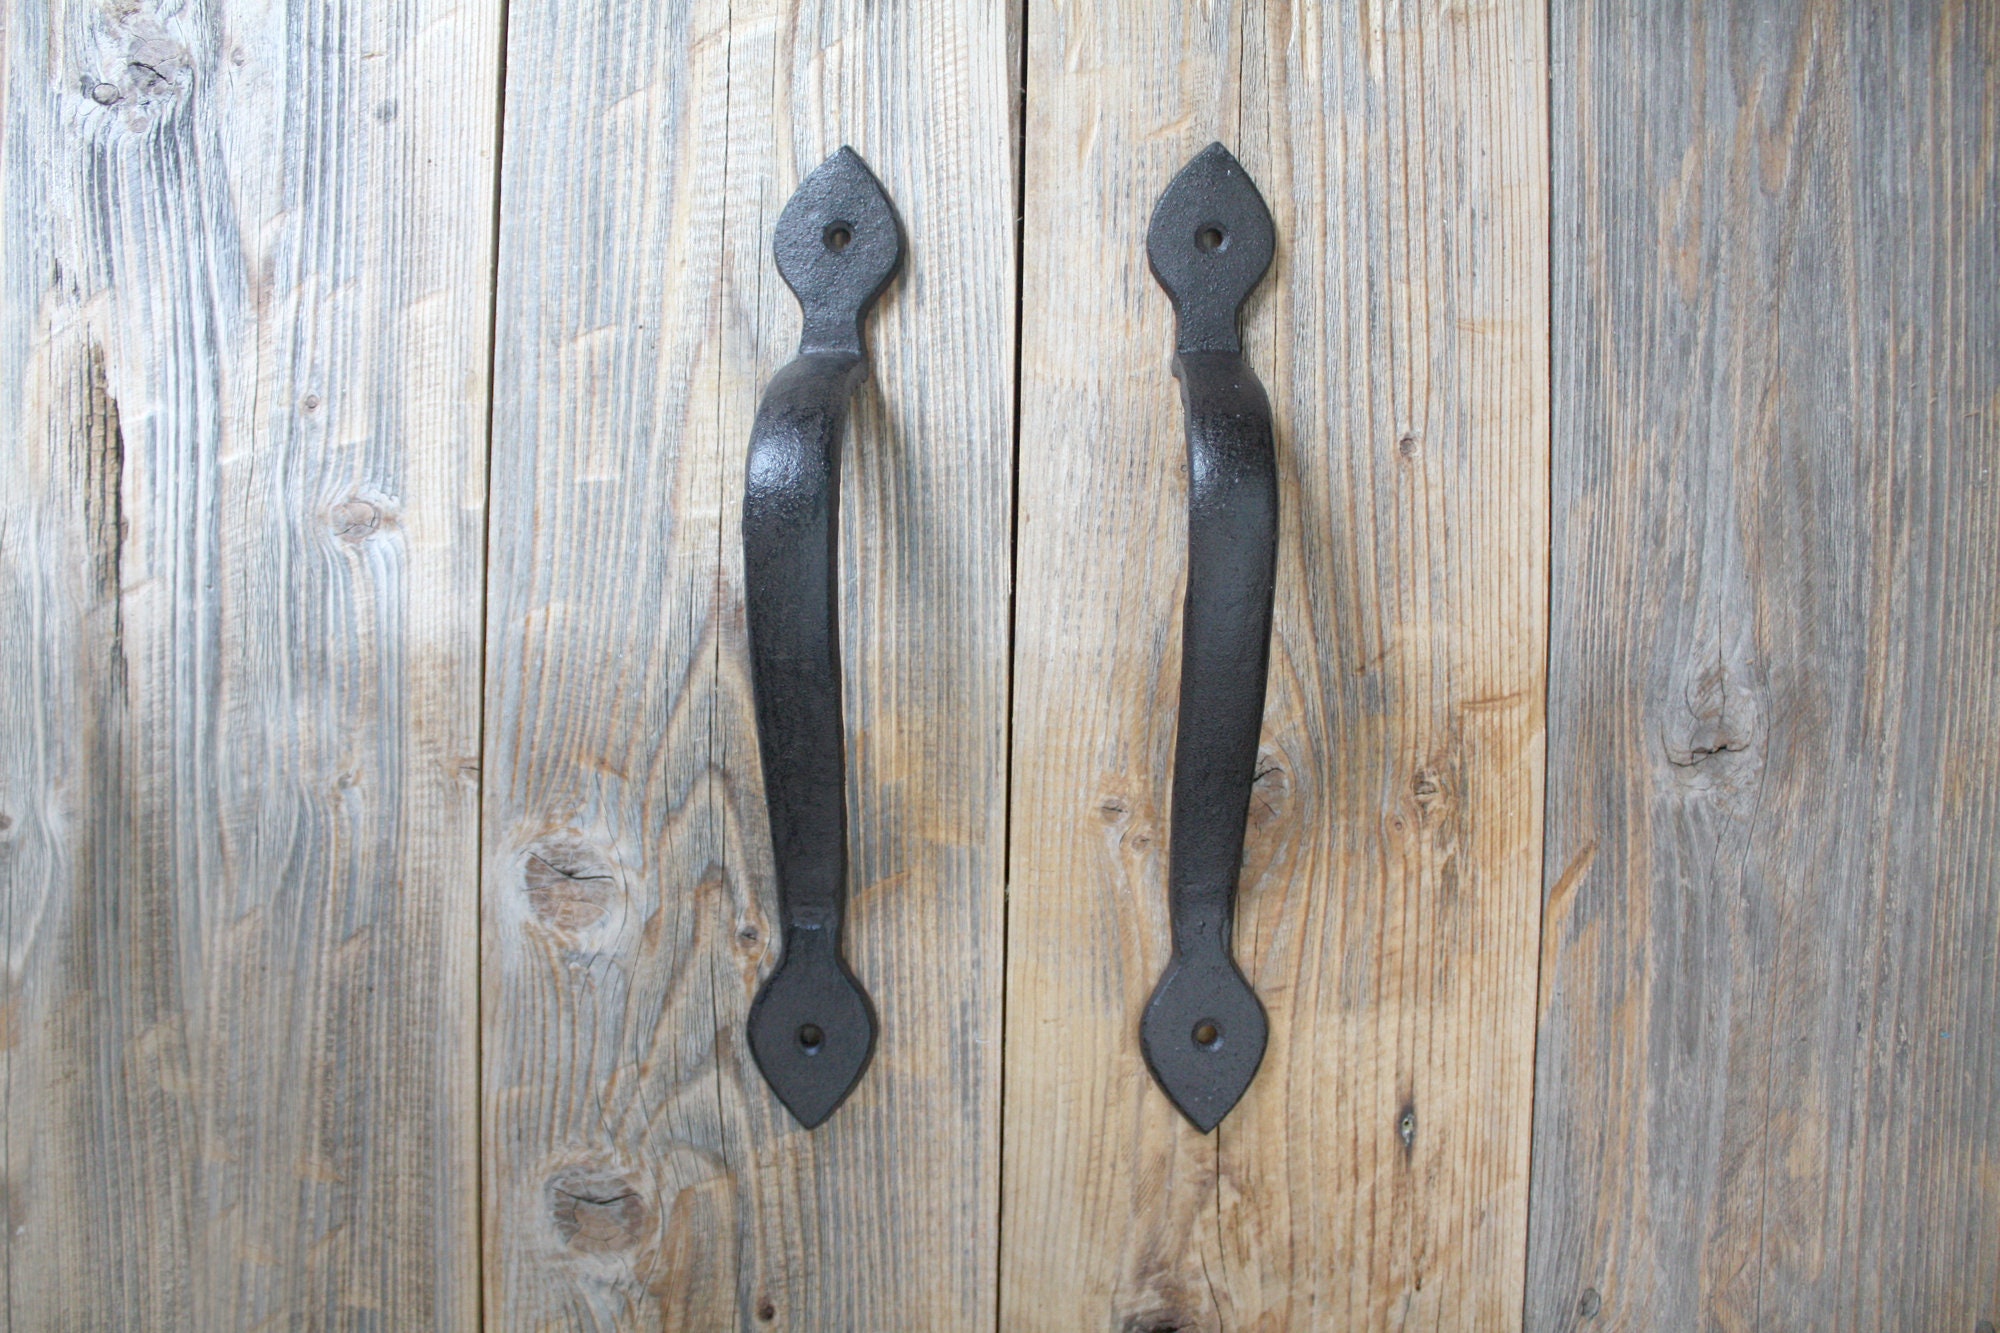 2 Large Cast Iron Antique Style FANCY Barn Handle Gate Pull Shed Door Handles #4 